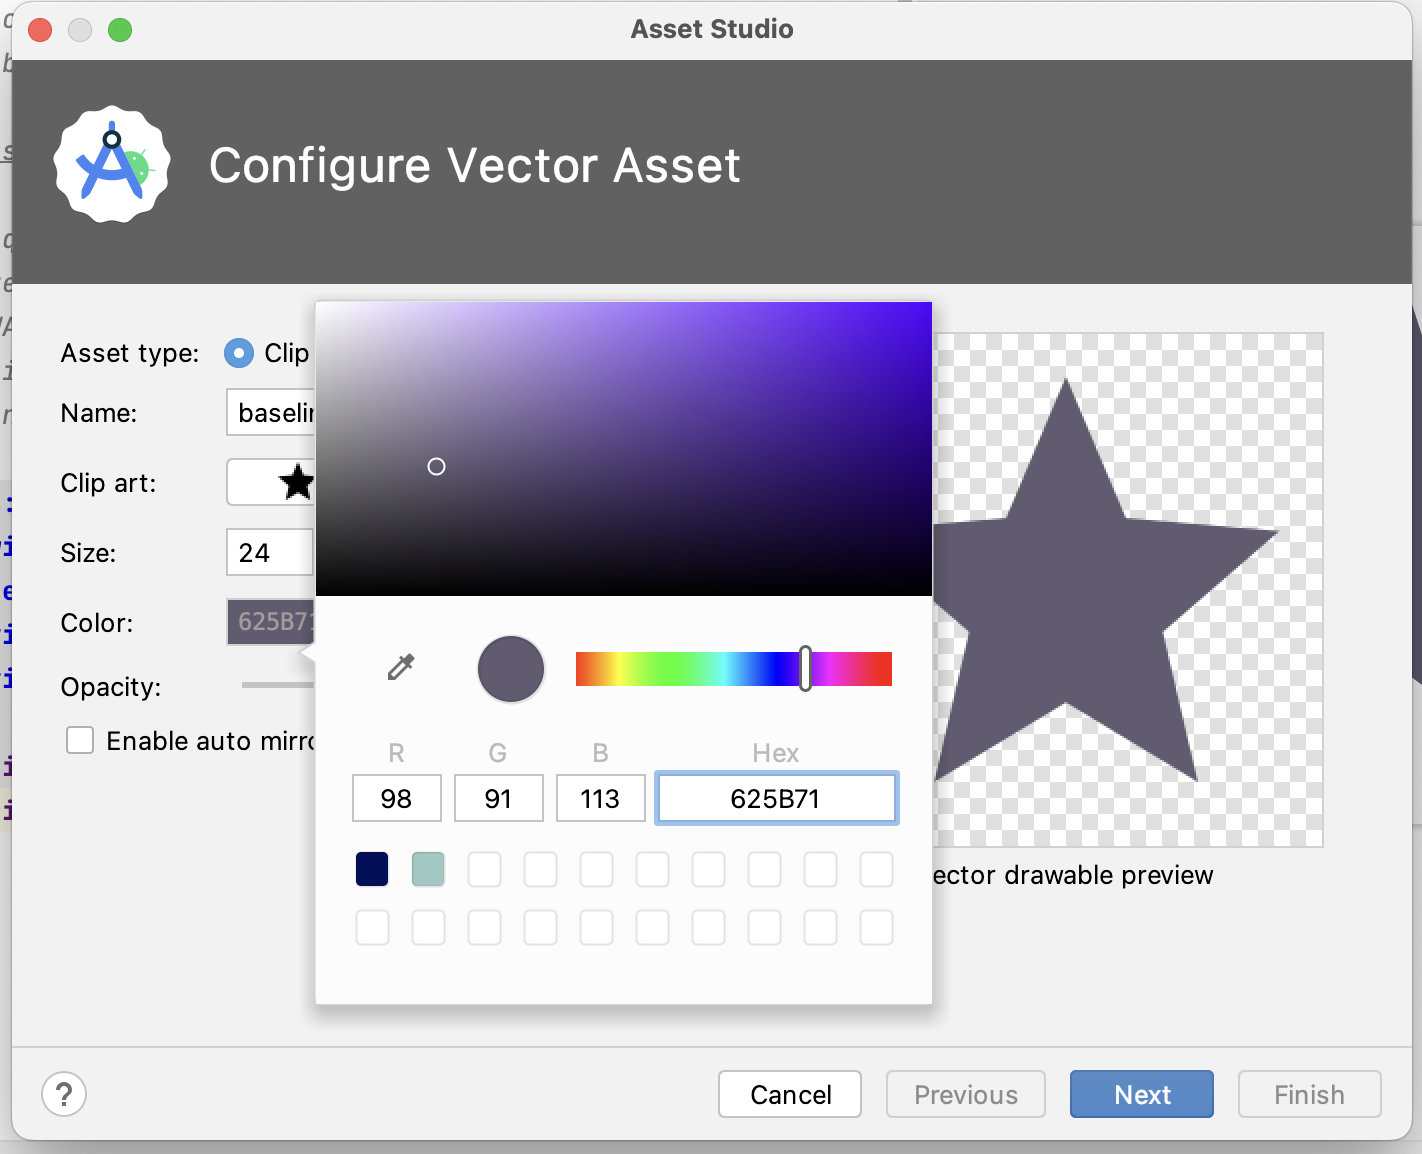 Asset studio dialog with configure vector asset and color 